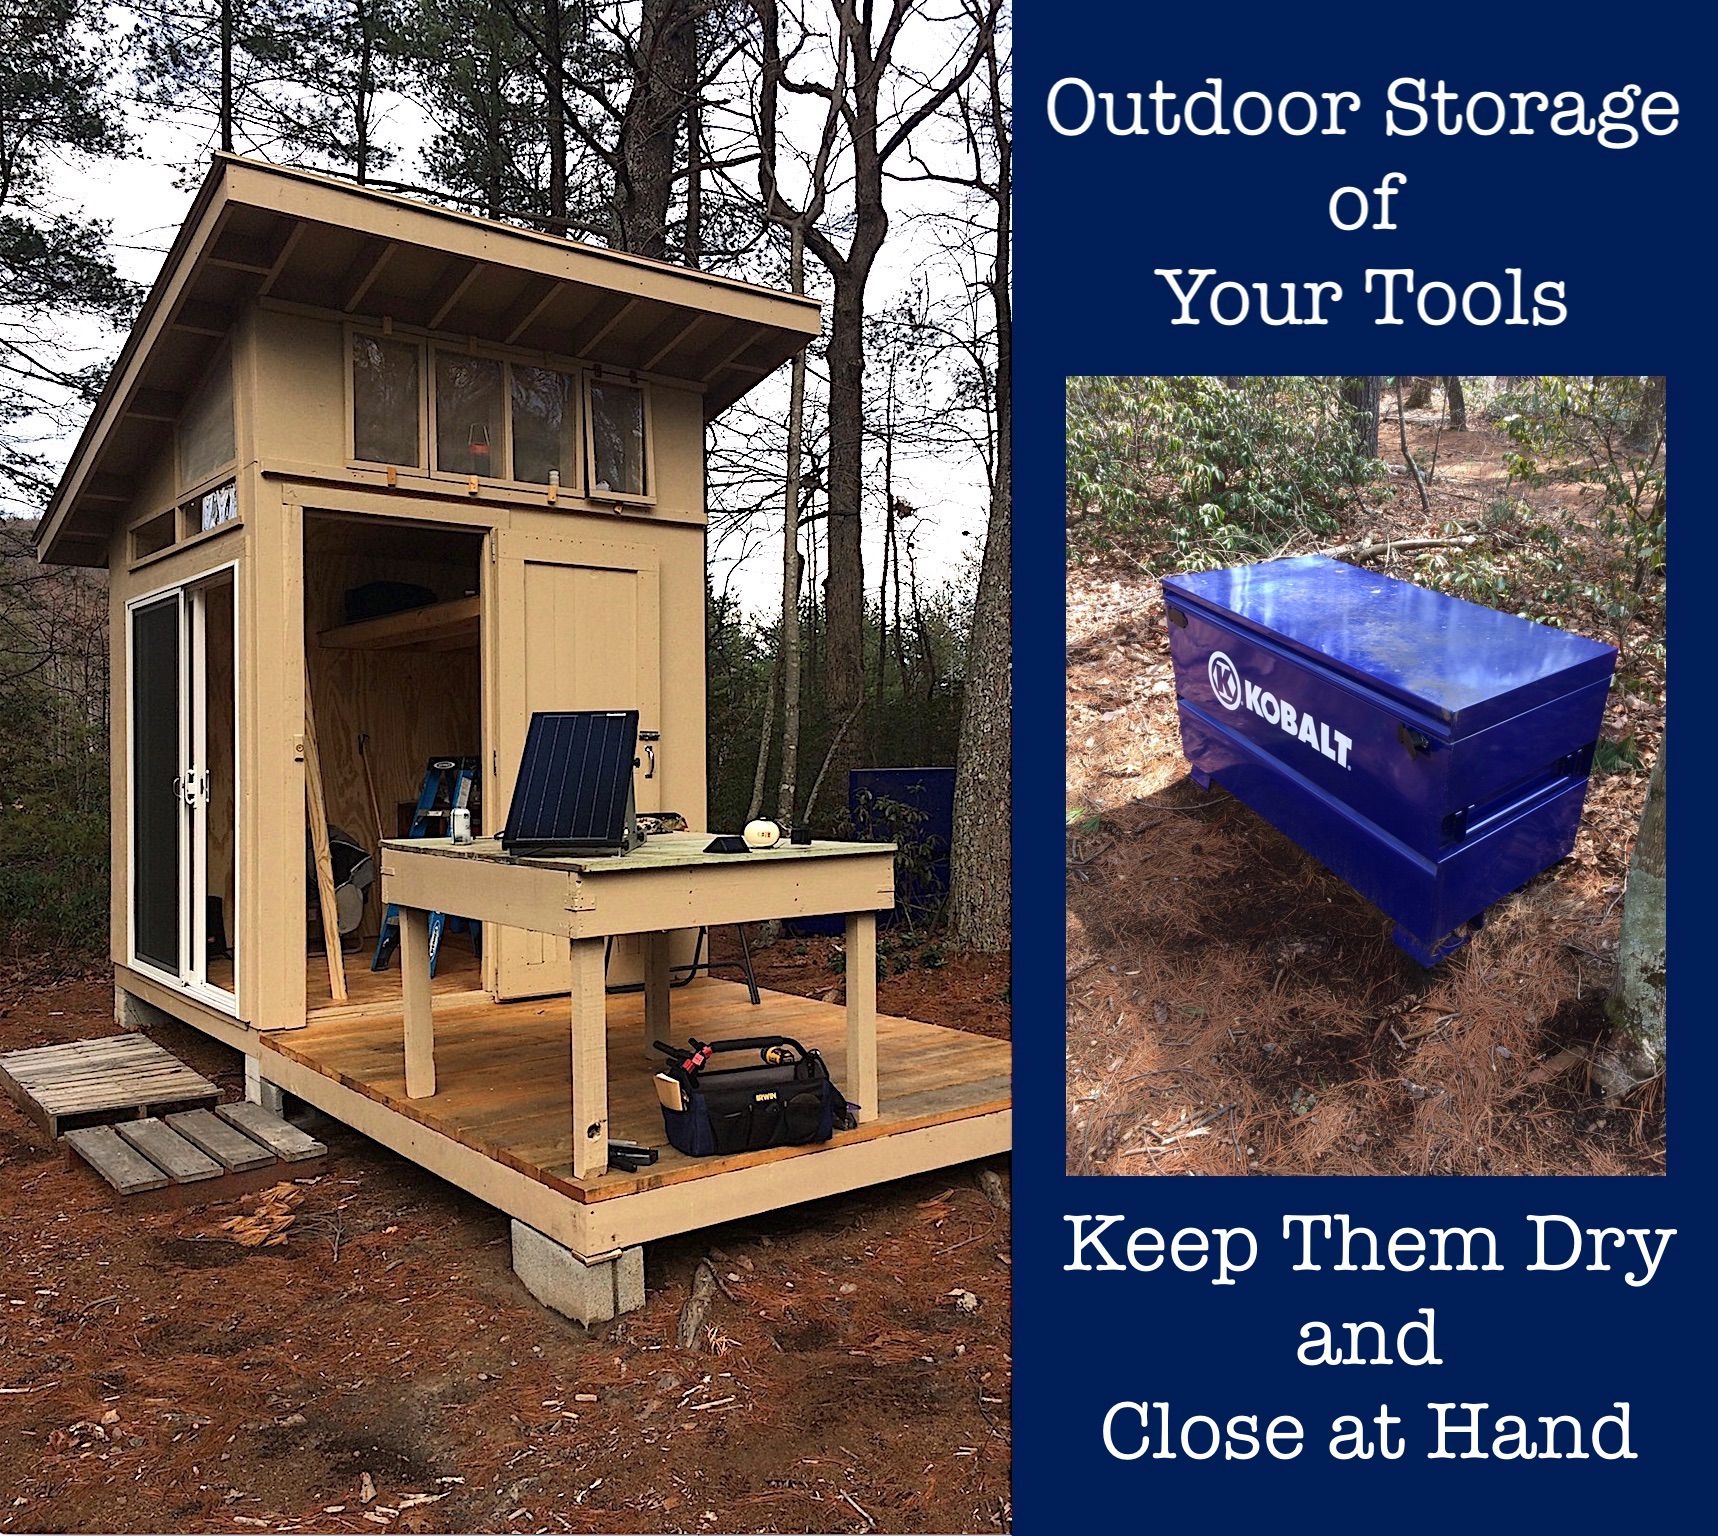 Great Way to Store Tools Outdoors: When Indoor Storage is Limited